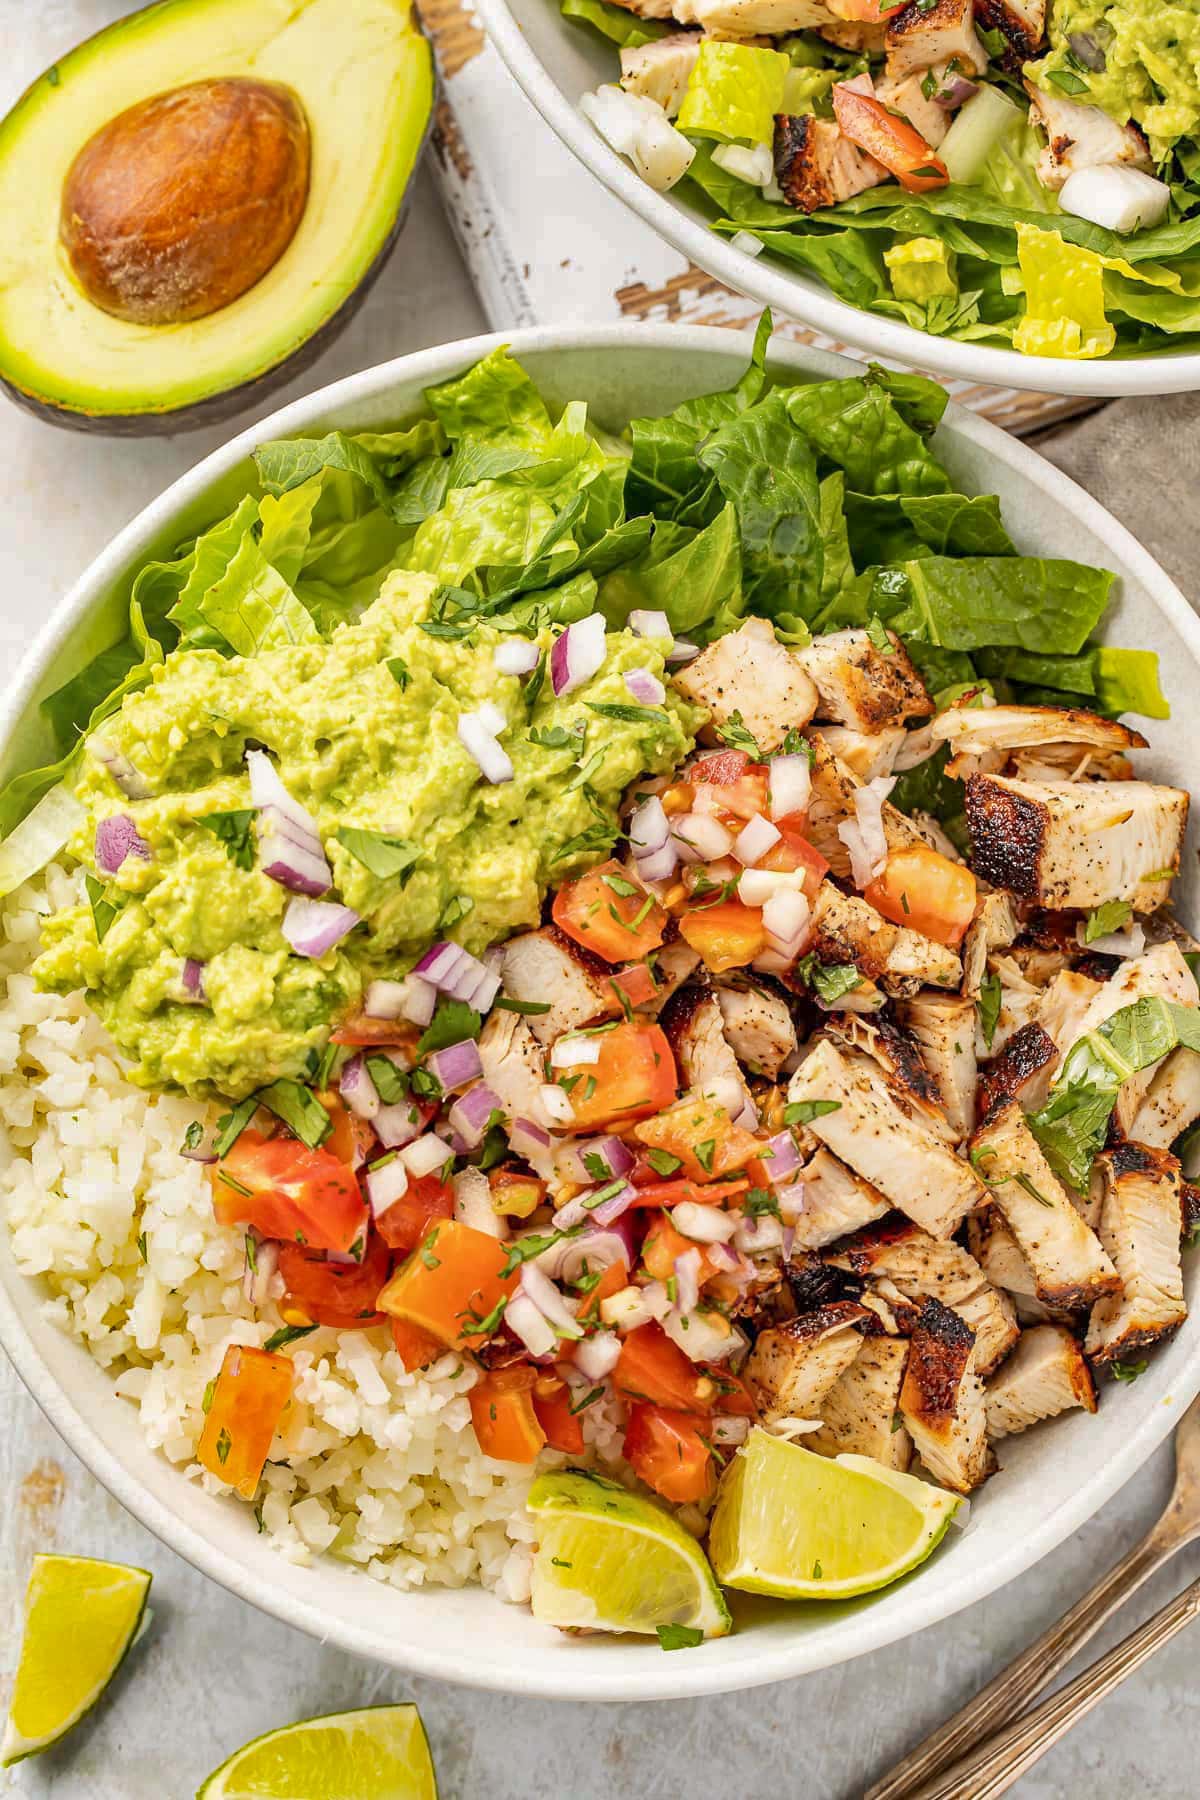 Close-up of a loaded burrito bowl with cauliflower rice, easy guacamole, fresh pico, grilled chicken, and green lettuce.